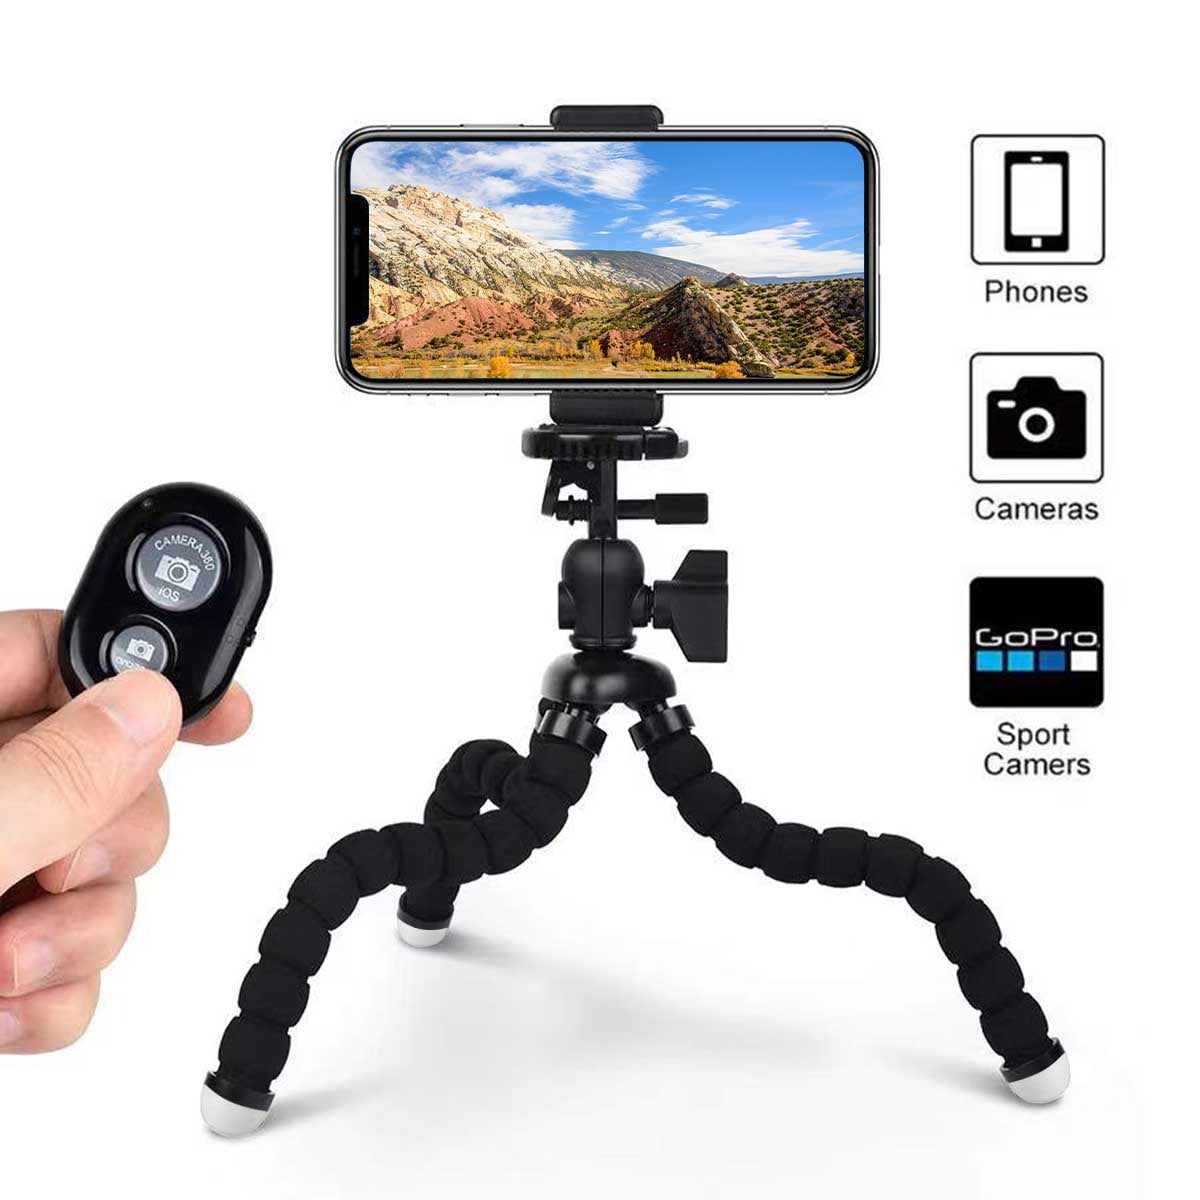 Slager Wiens Shuraba Phone Tripod,Candywe Cell Phone Tripod Flexible Tripod with Bluetooth  Remote Shutter,Mini Tripod for iPhone Android Phone Camera GoPro,Smartphone  Tripod Mount Stand with Carry Pouch - Walmart.com